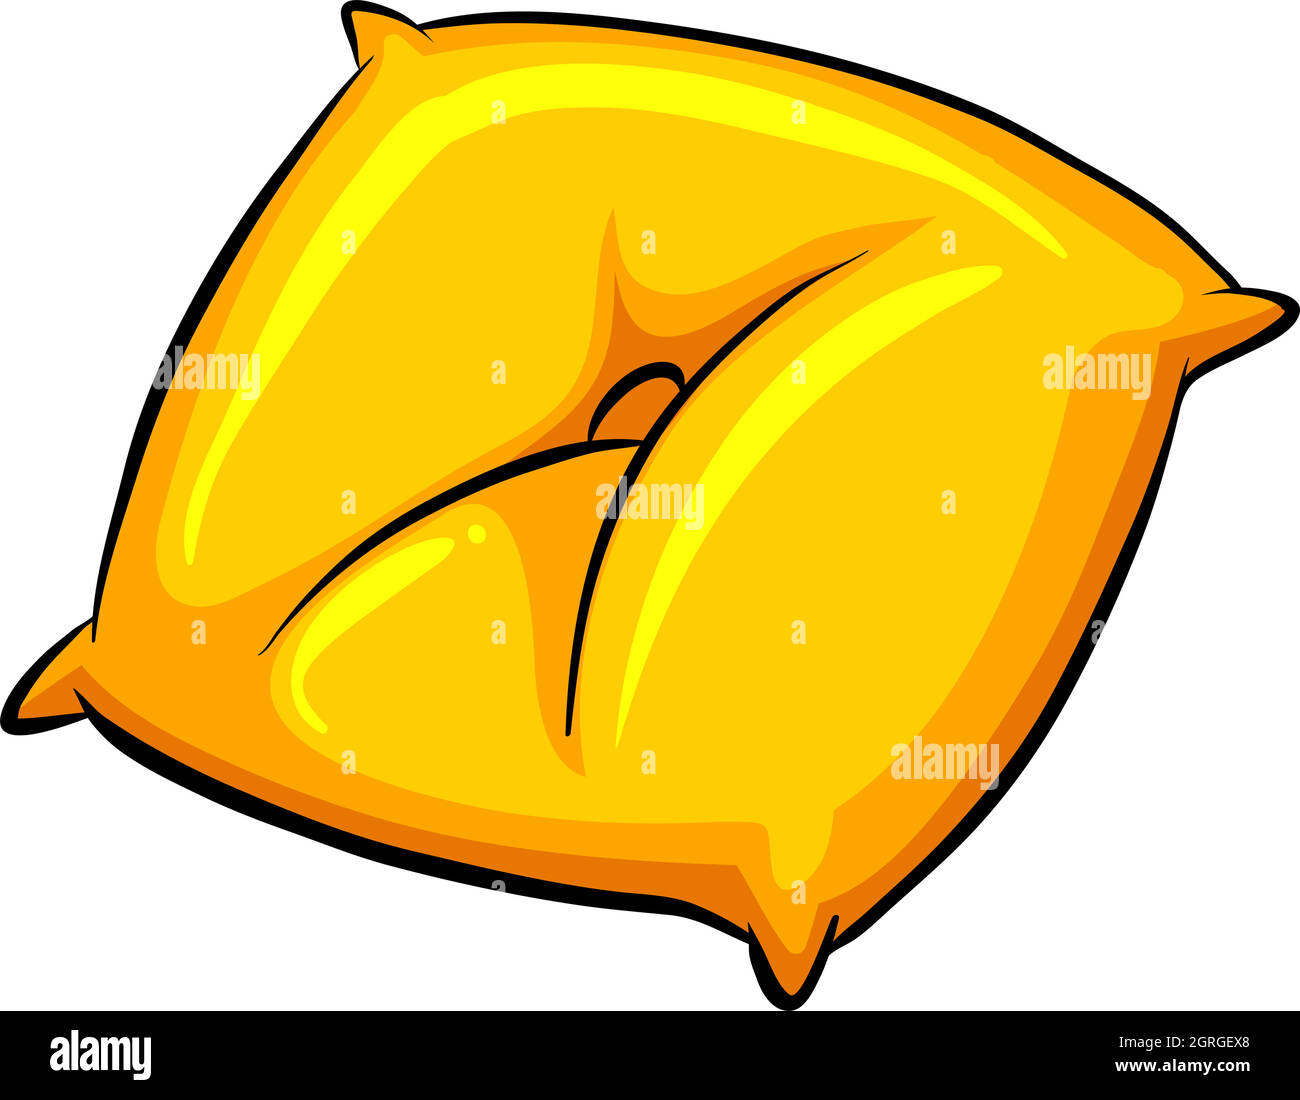 An image showing a couch potato Stock Vector